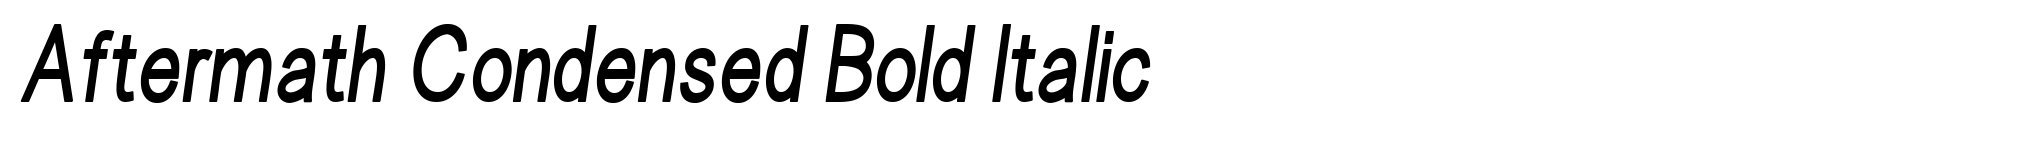 Aftermath Condensed Bold Italic image